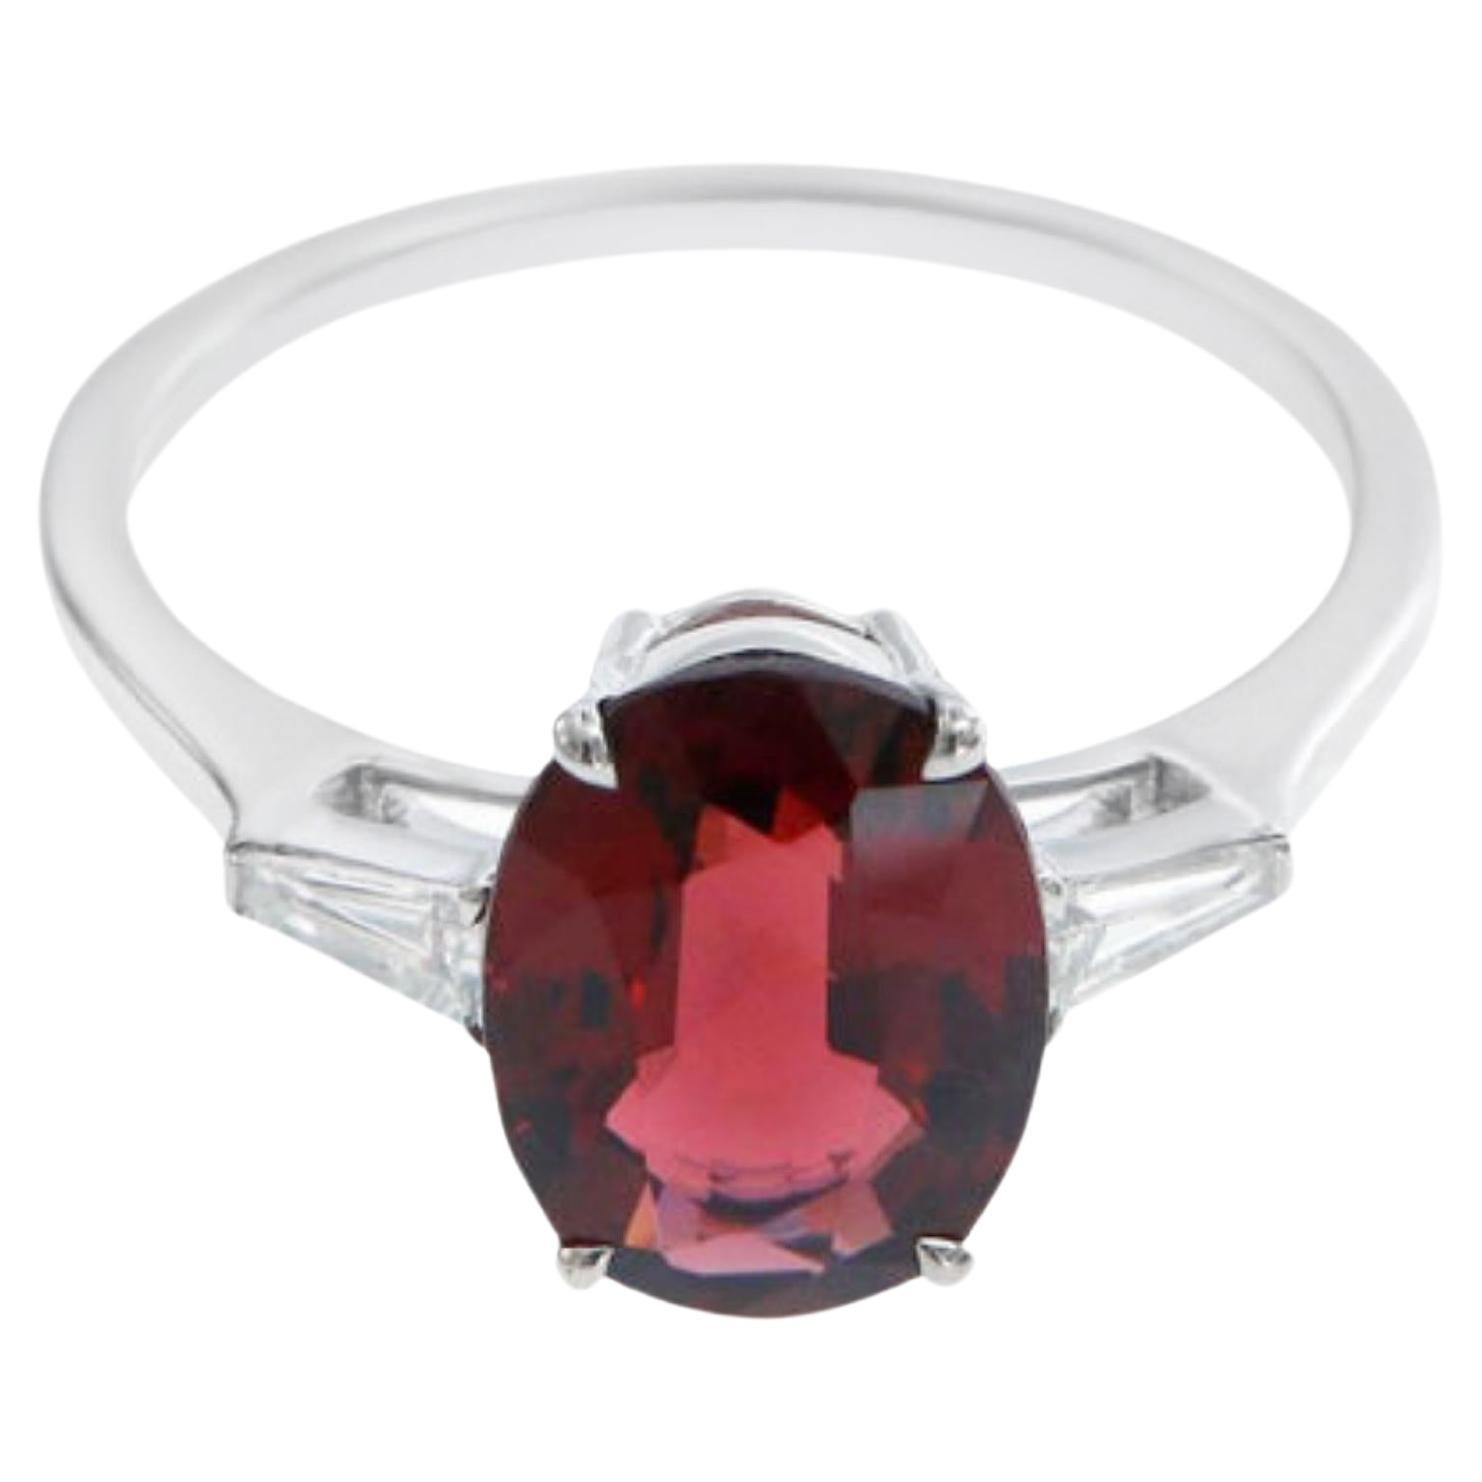 2.48 Carat Red Spinel Ring with Tapered Diamond Baguettes in 18K White Gold